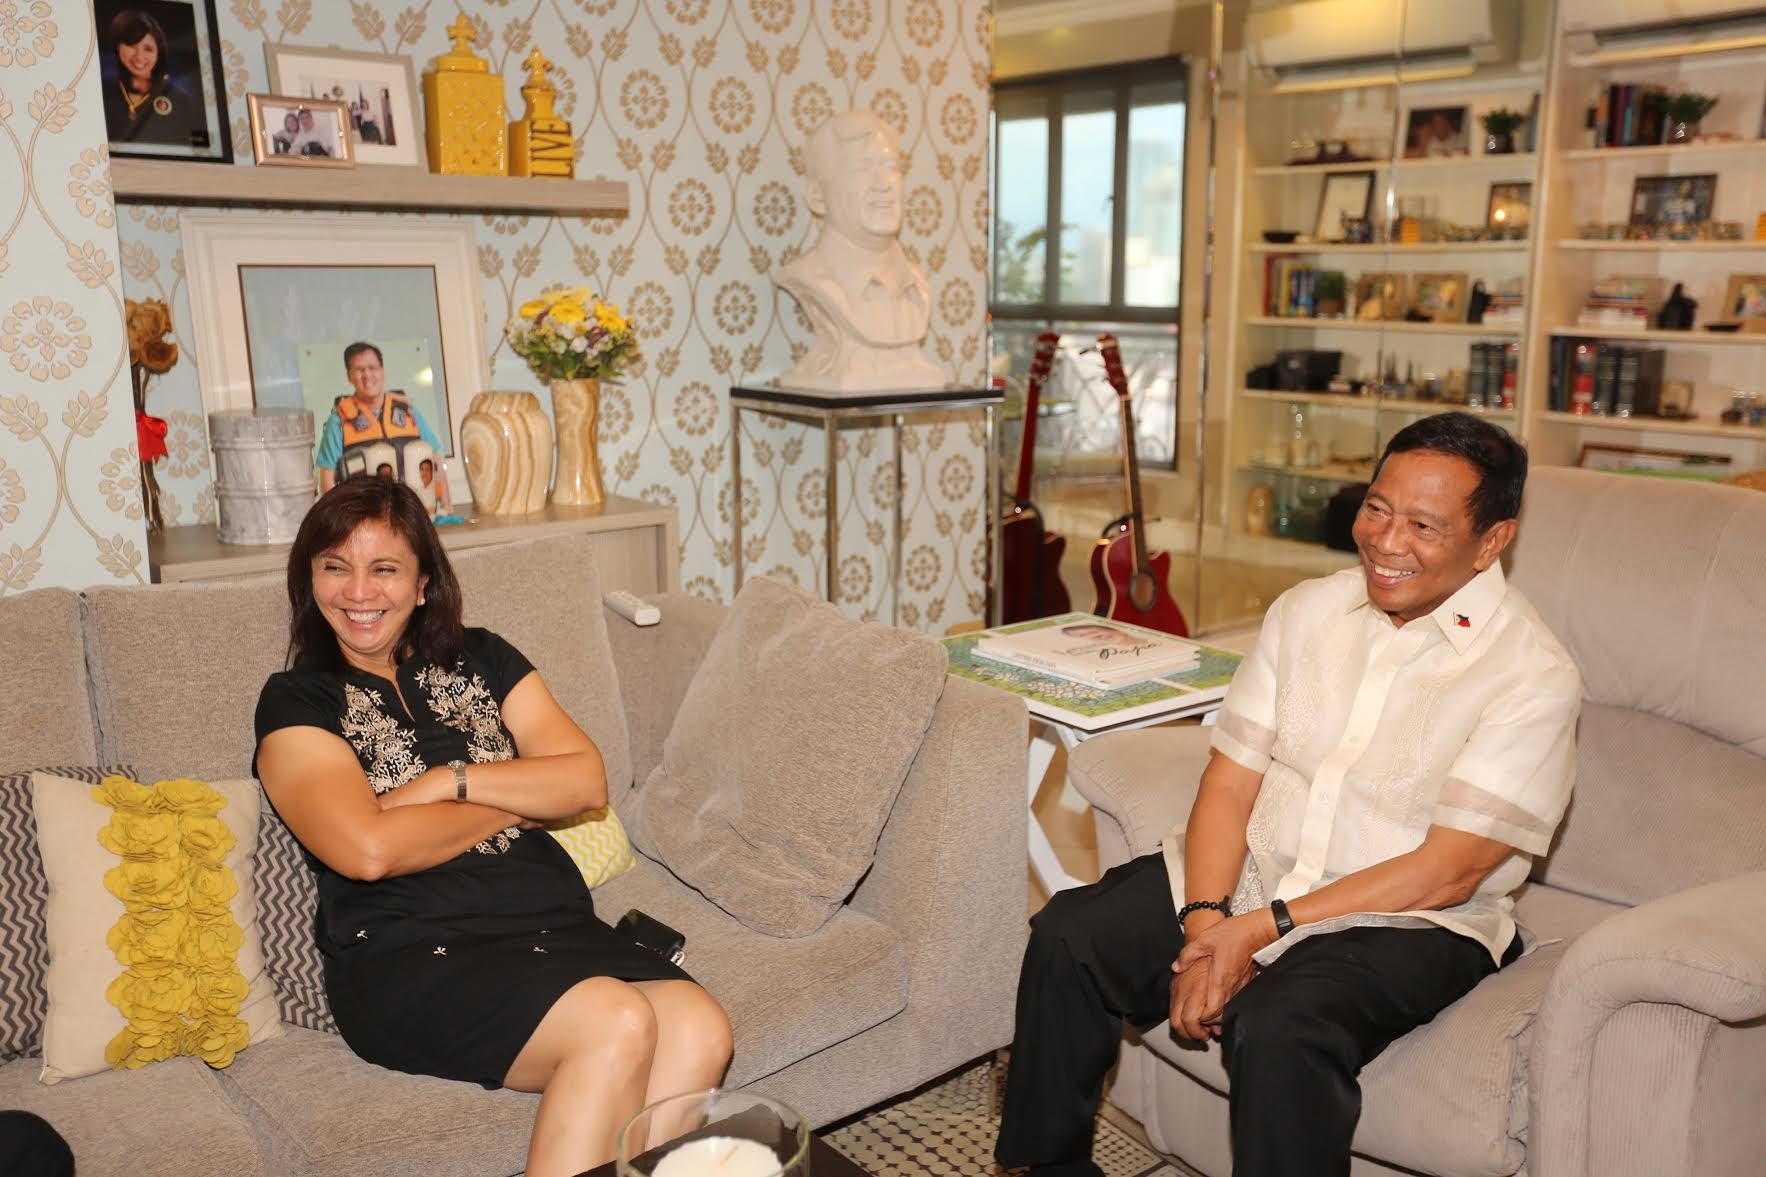 VP TO VP. It was a cordial meeting between Robredo and Binay, who exchanged pleasantries during the visit. Photo courtesy of the Office of the Vice President 